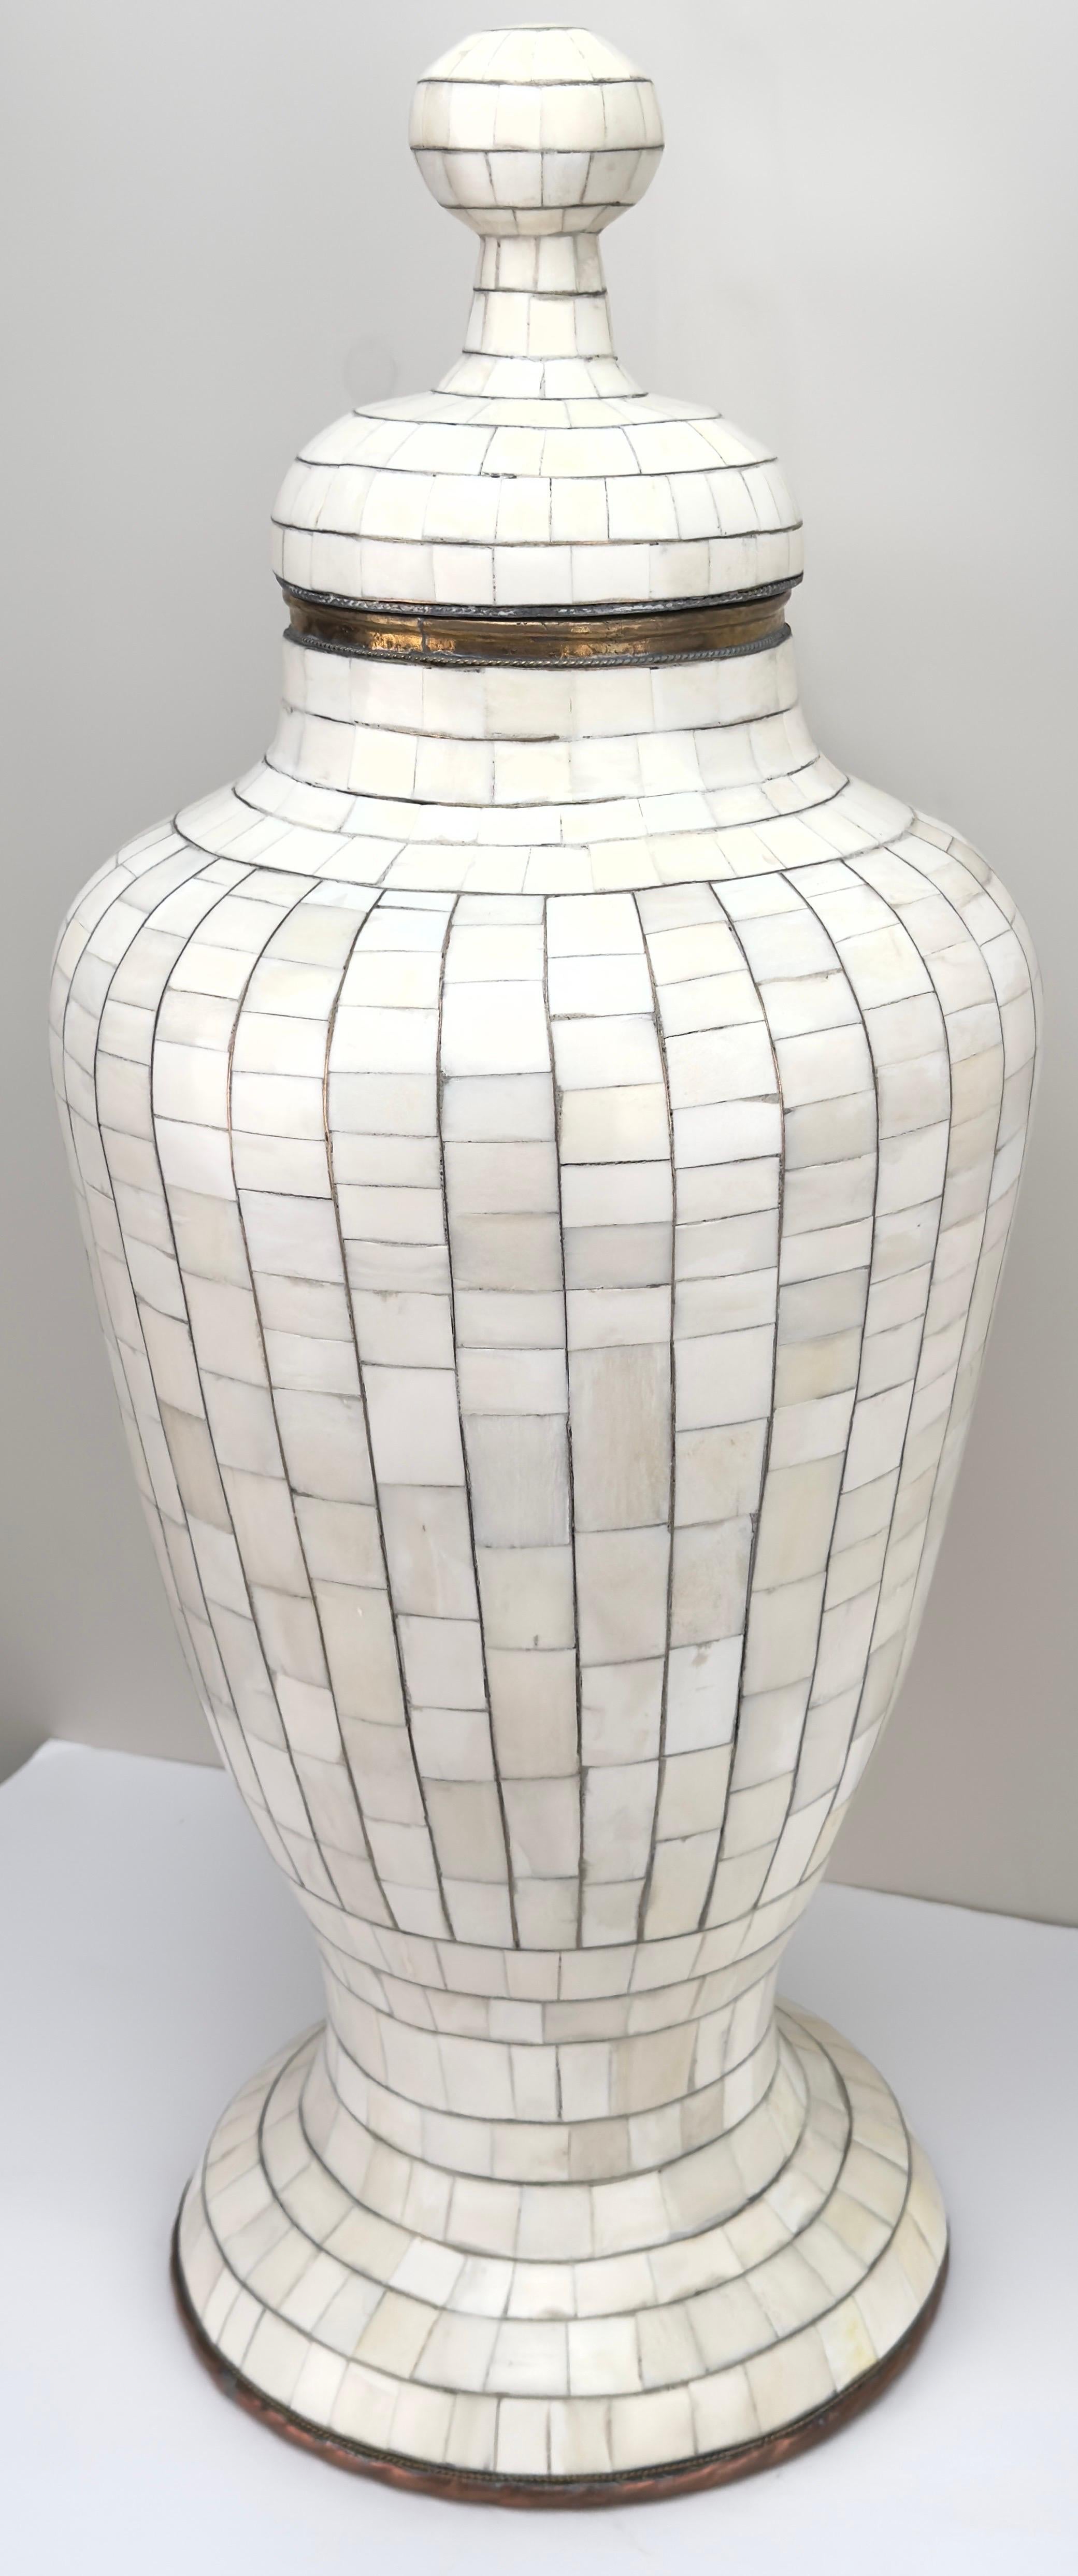 Natural Off-White Mosaic Bone over Brass Urn or Vase. Beautiful antique natural bone over brass urn or vase. The handcrafted urn can be a center piece of any room and add an exotic and elegant touch to any living environment. The bone is naturally